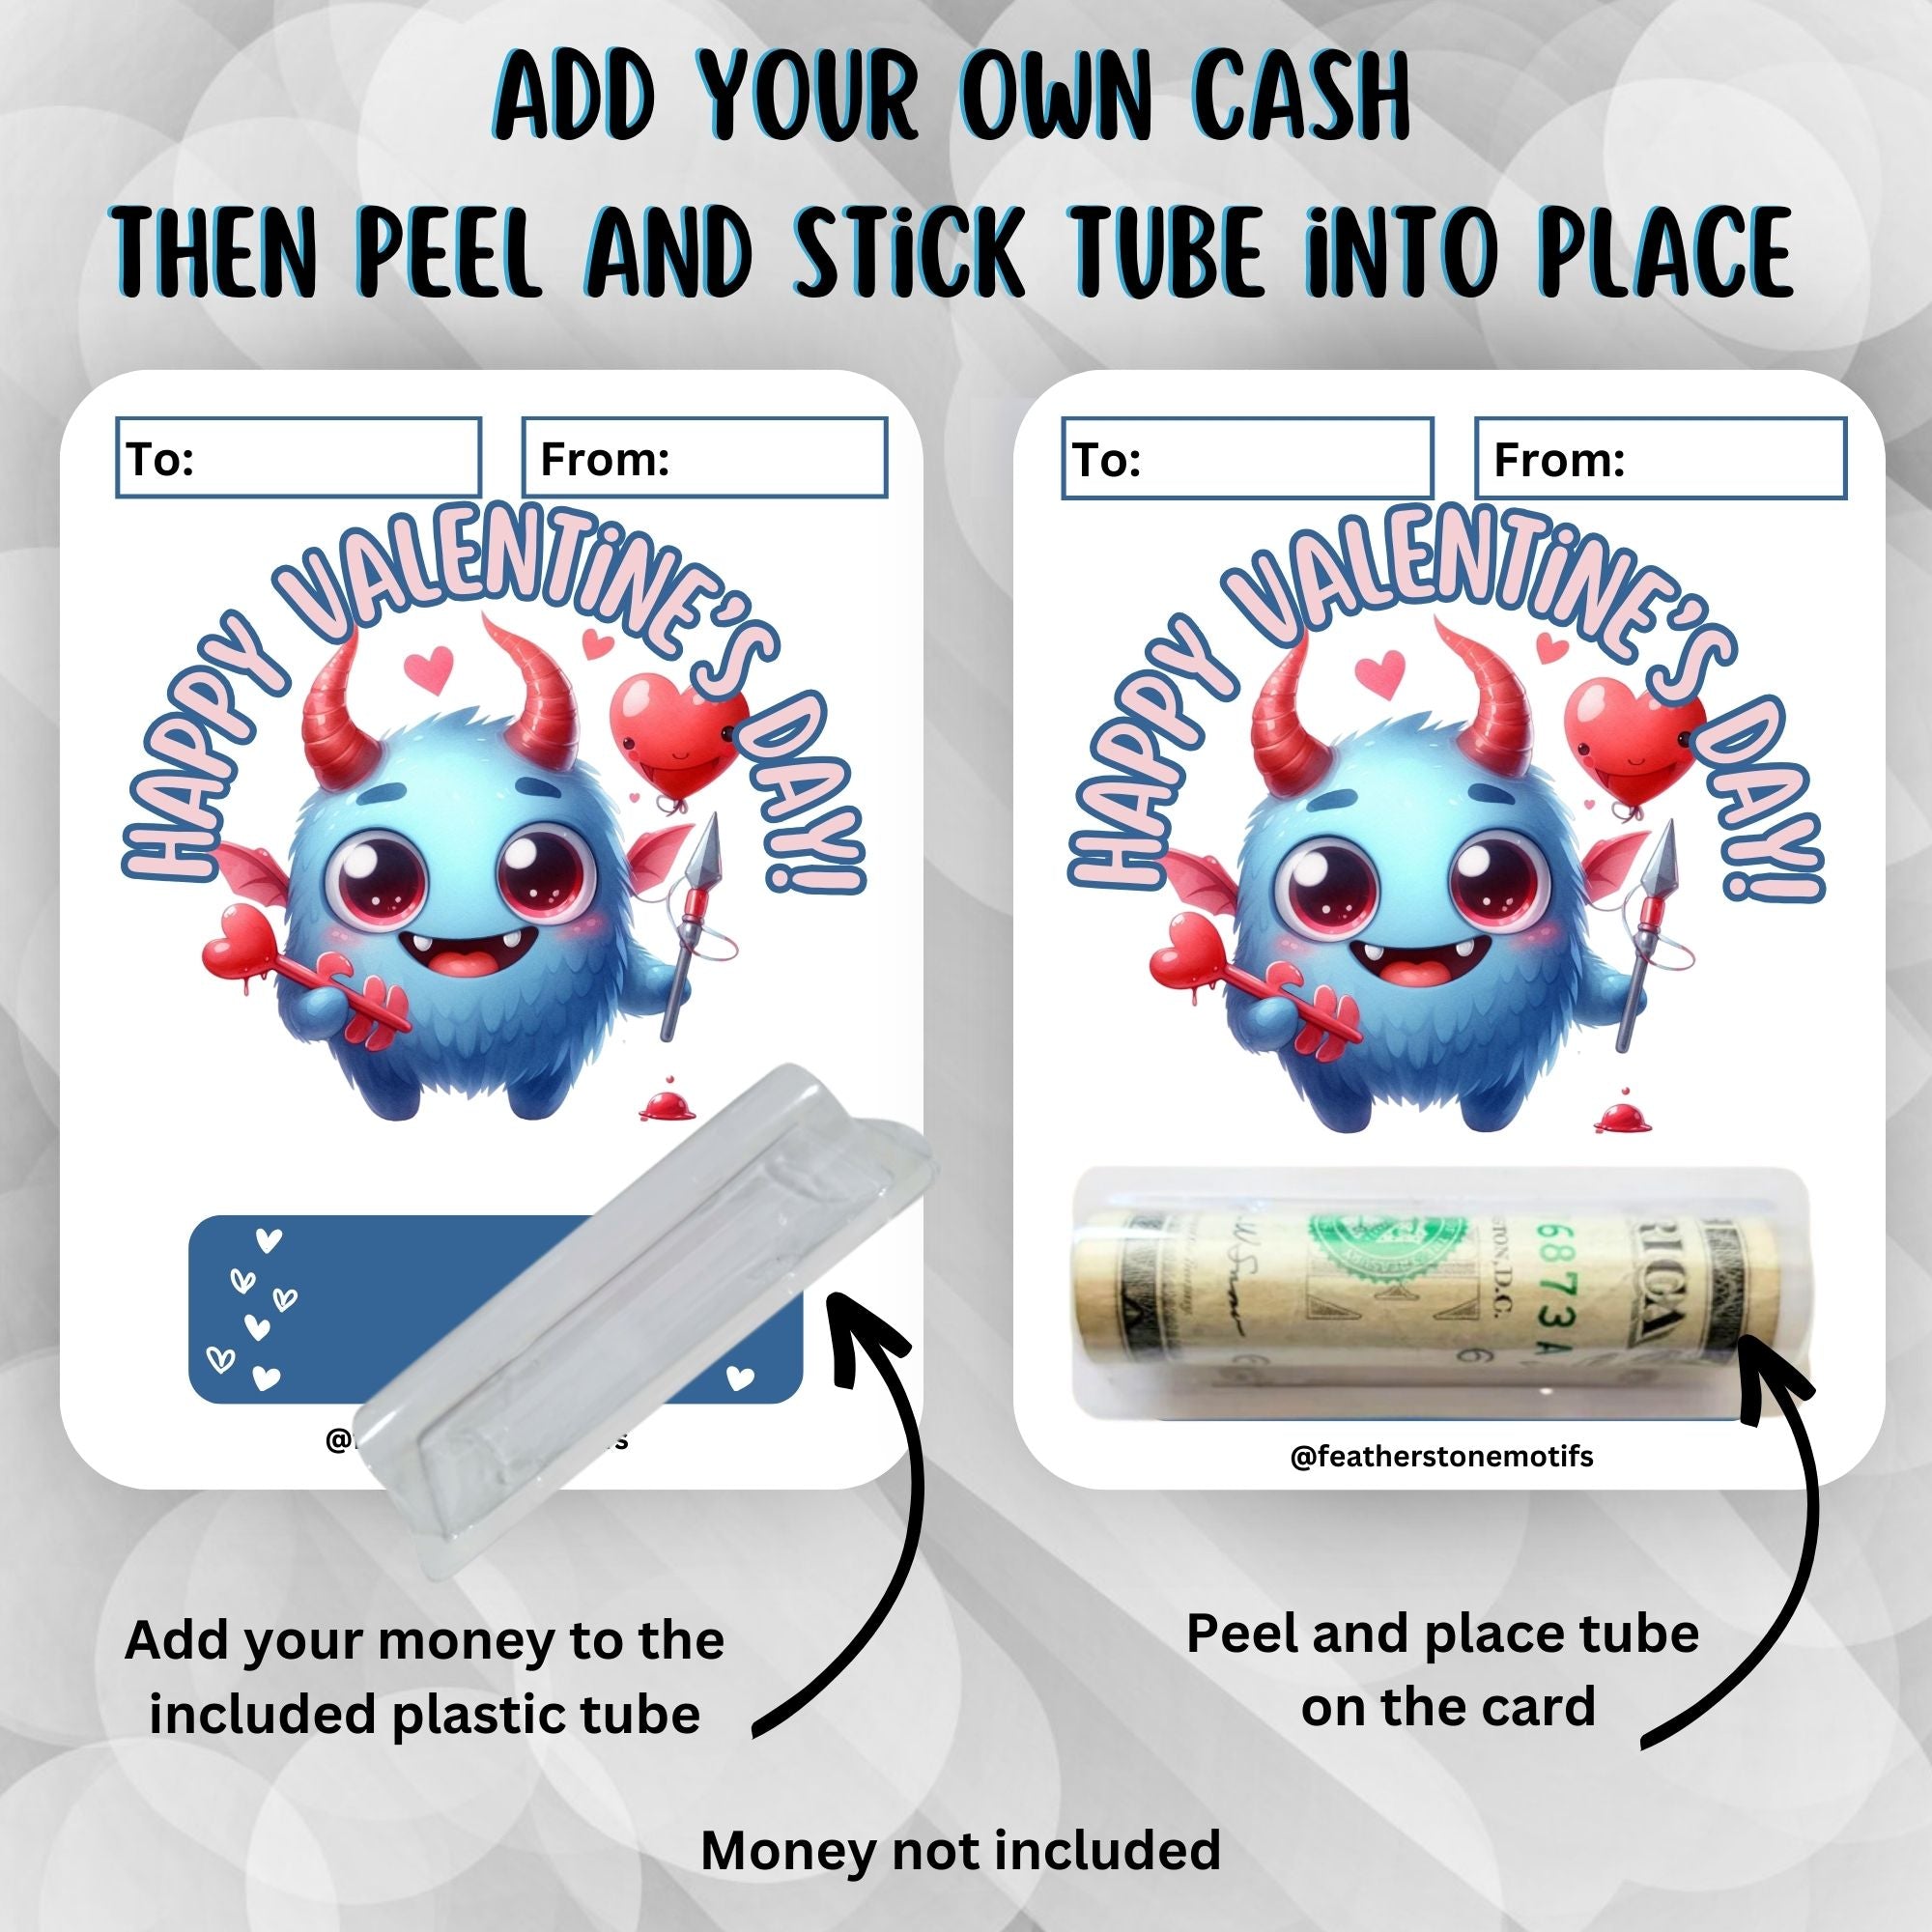 This image shows how to attach the money card to the Blue Monster Valentine Money Card.